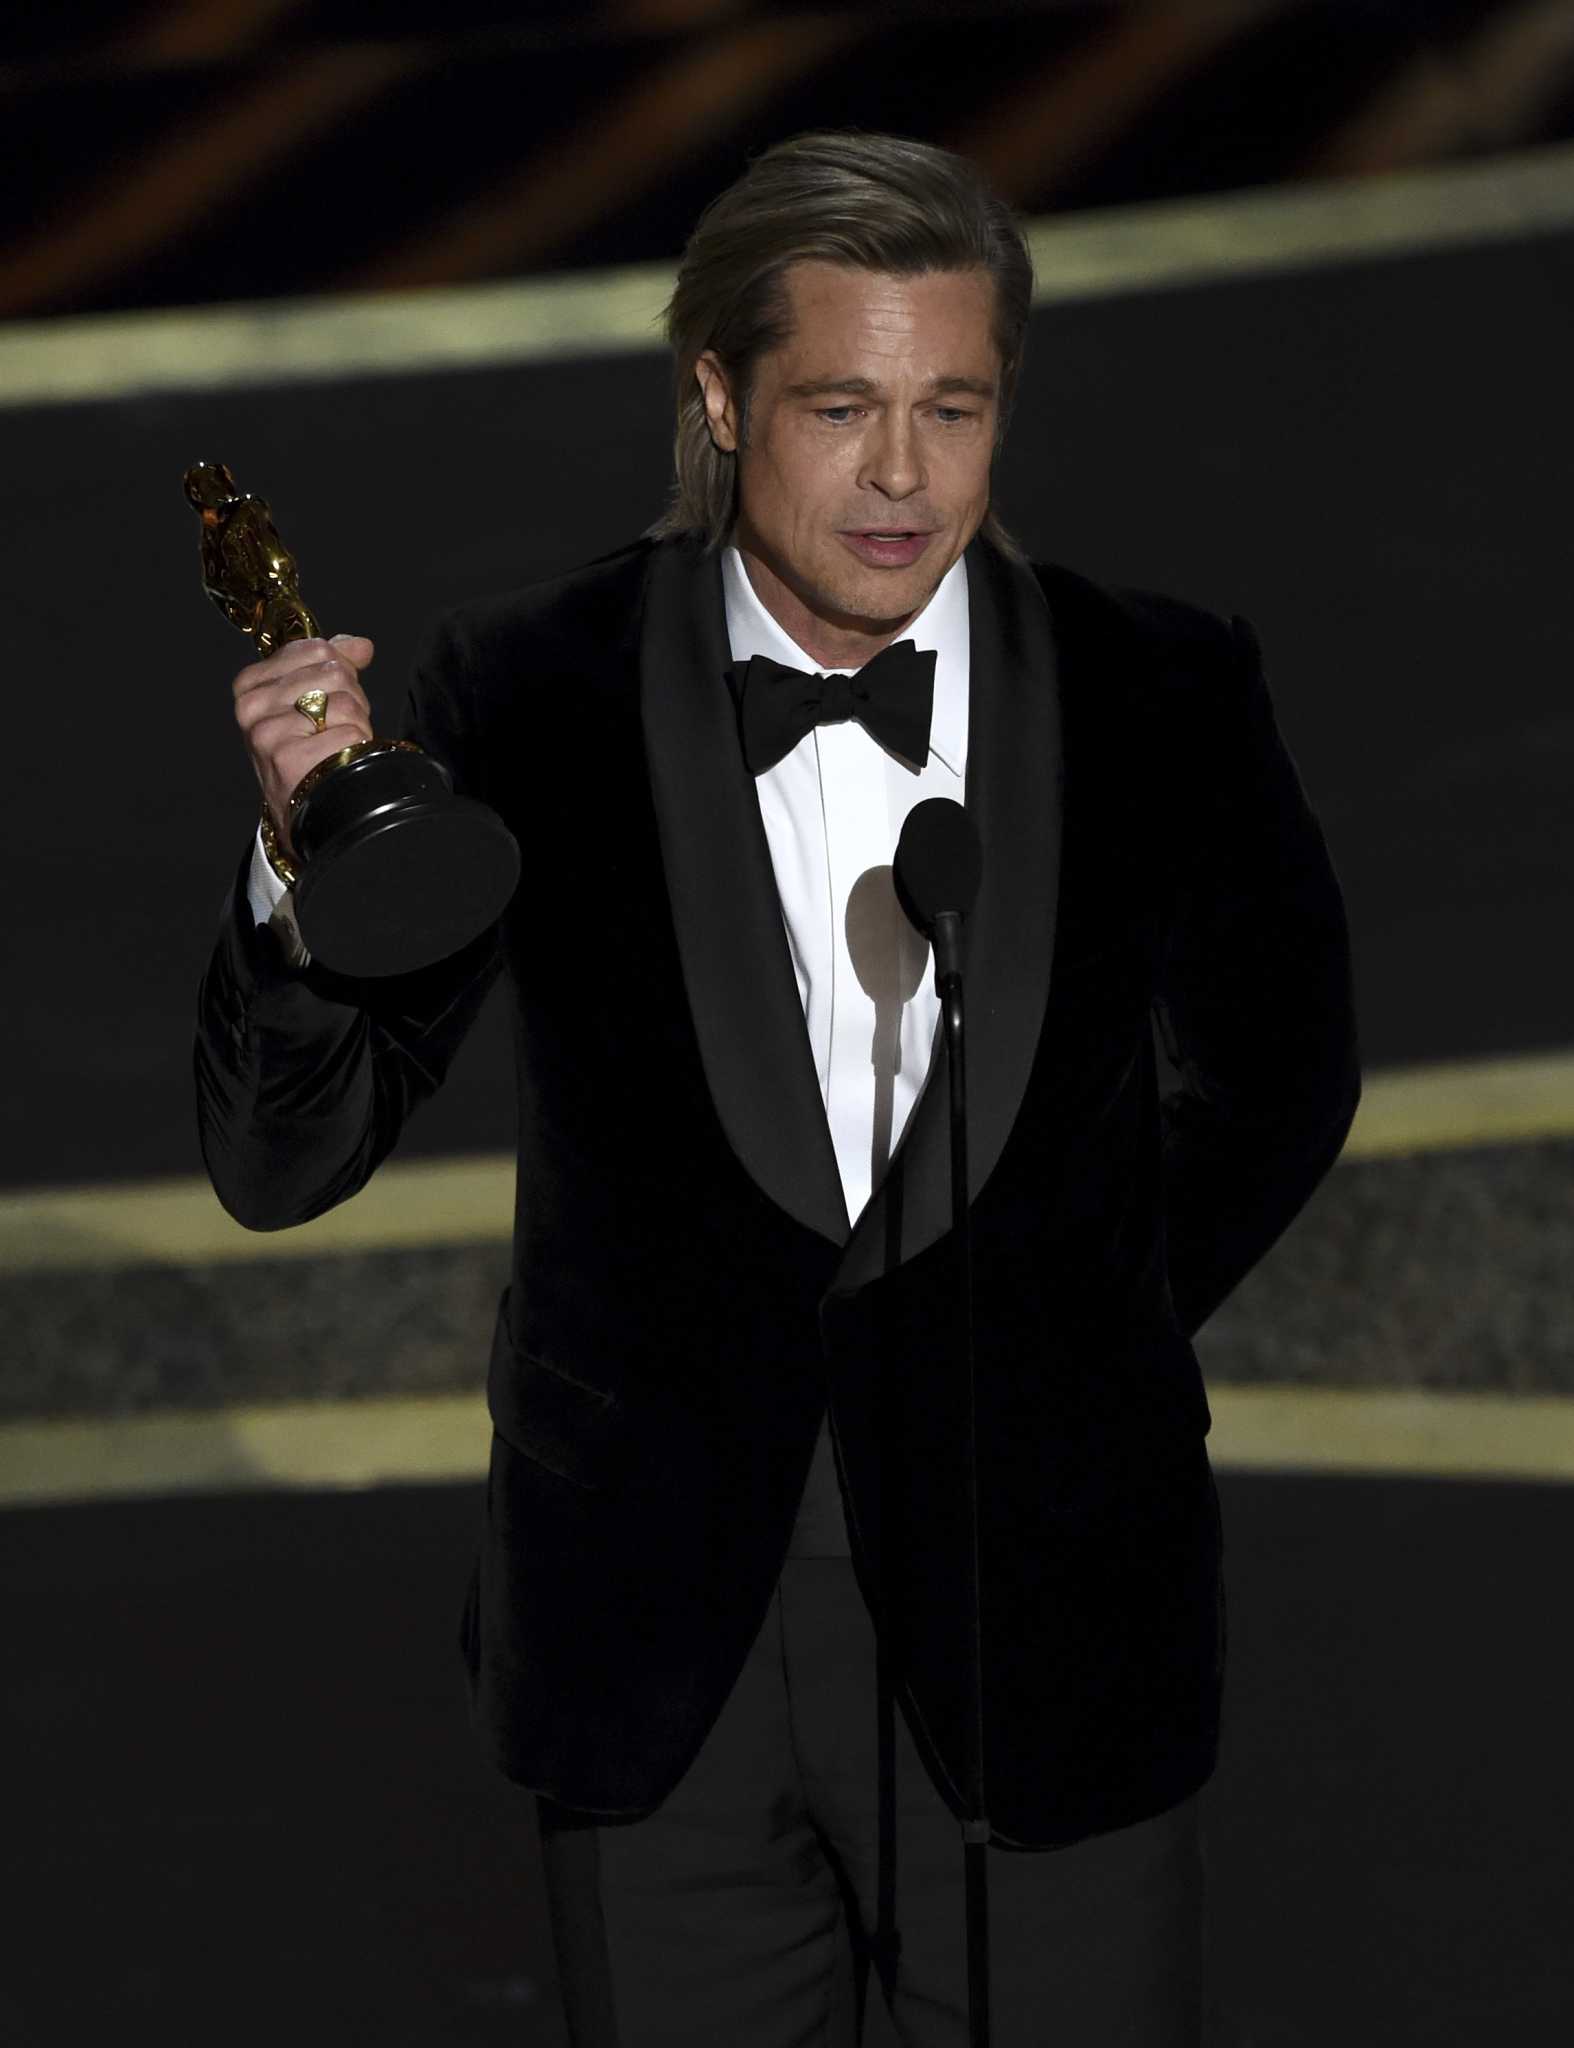 Oscars 2020 winners: Full list of results with live updates - SFGate1574 x 2048